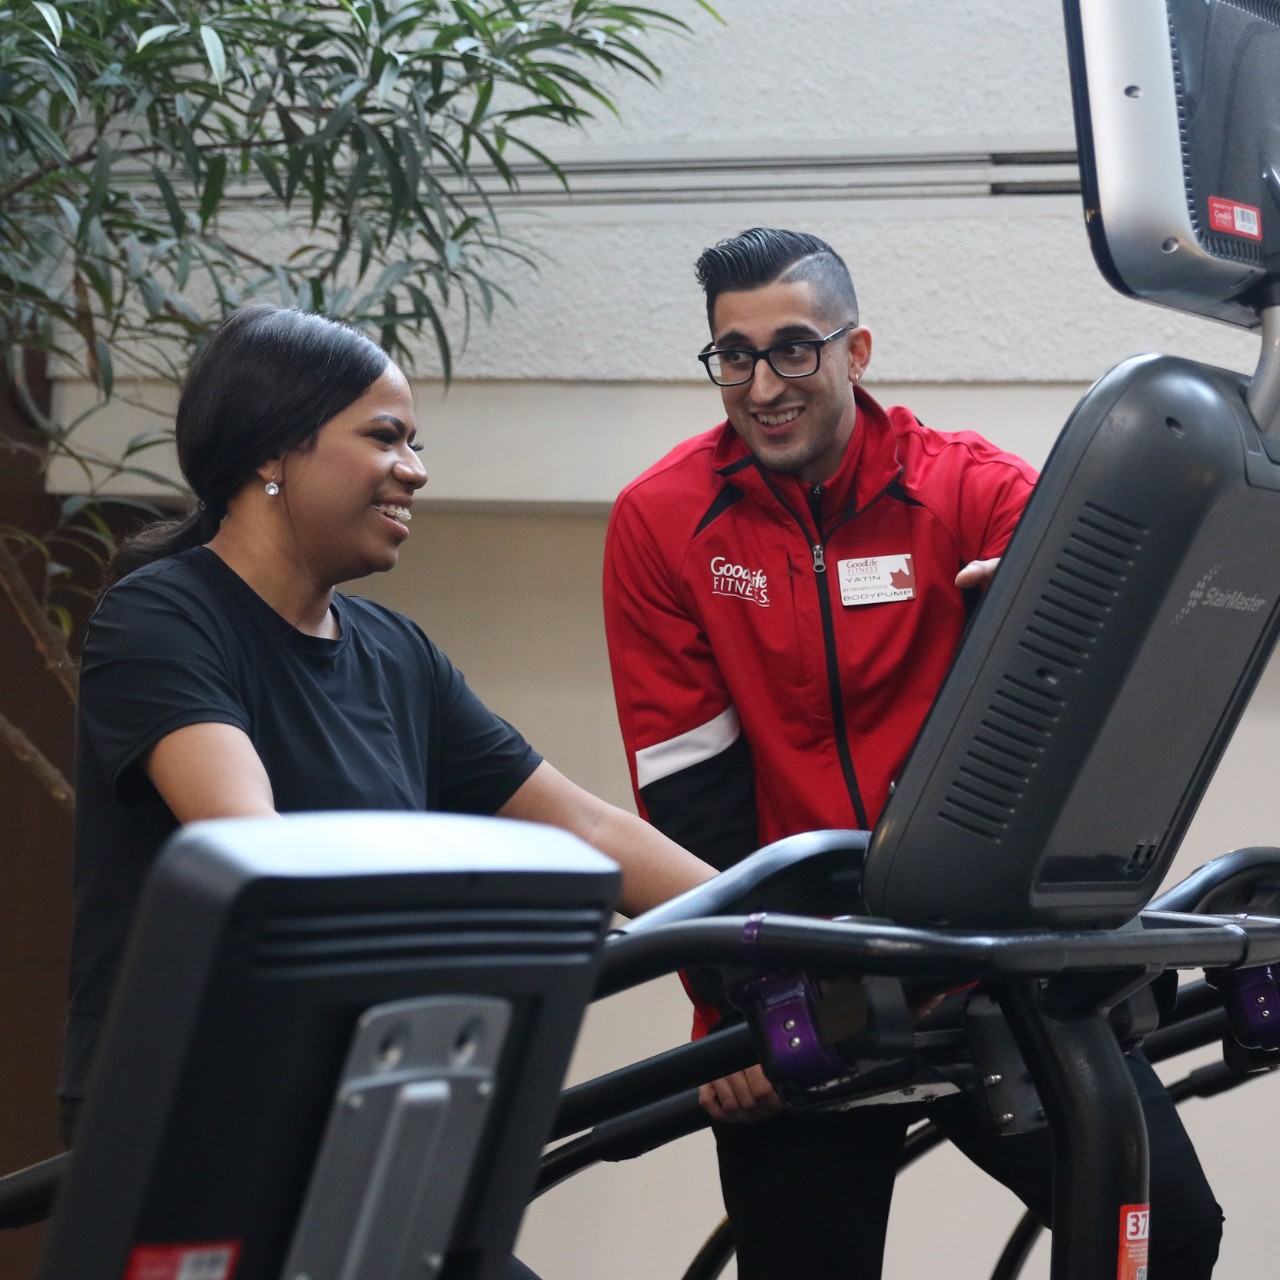 A Personal Trainer assisting a Member on the cardio equipment at GoodLife